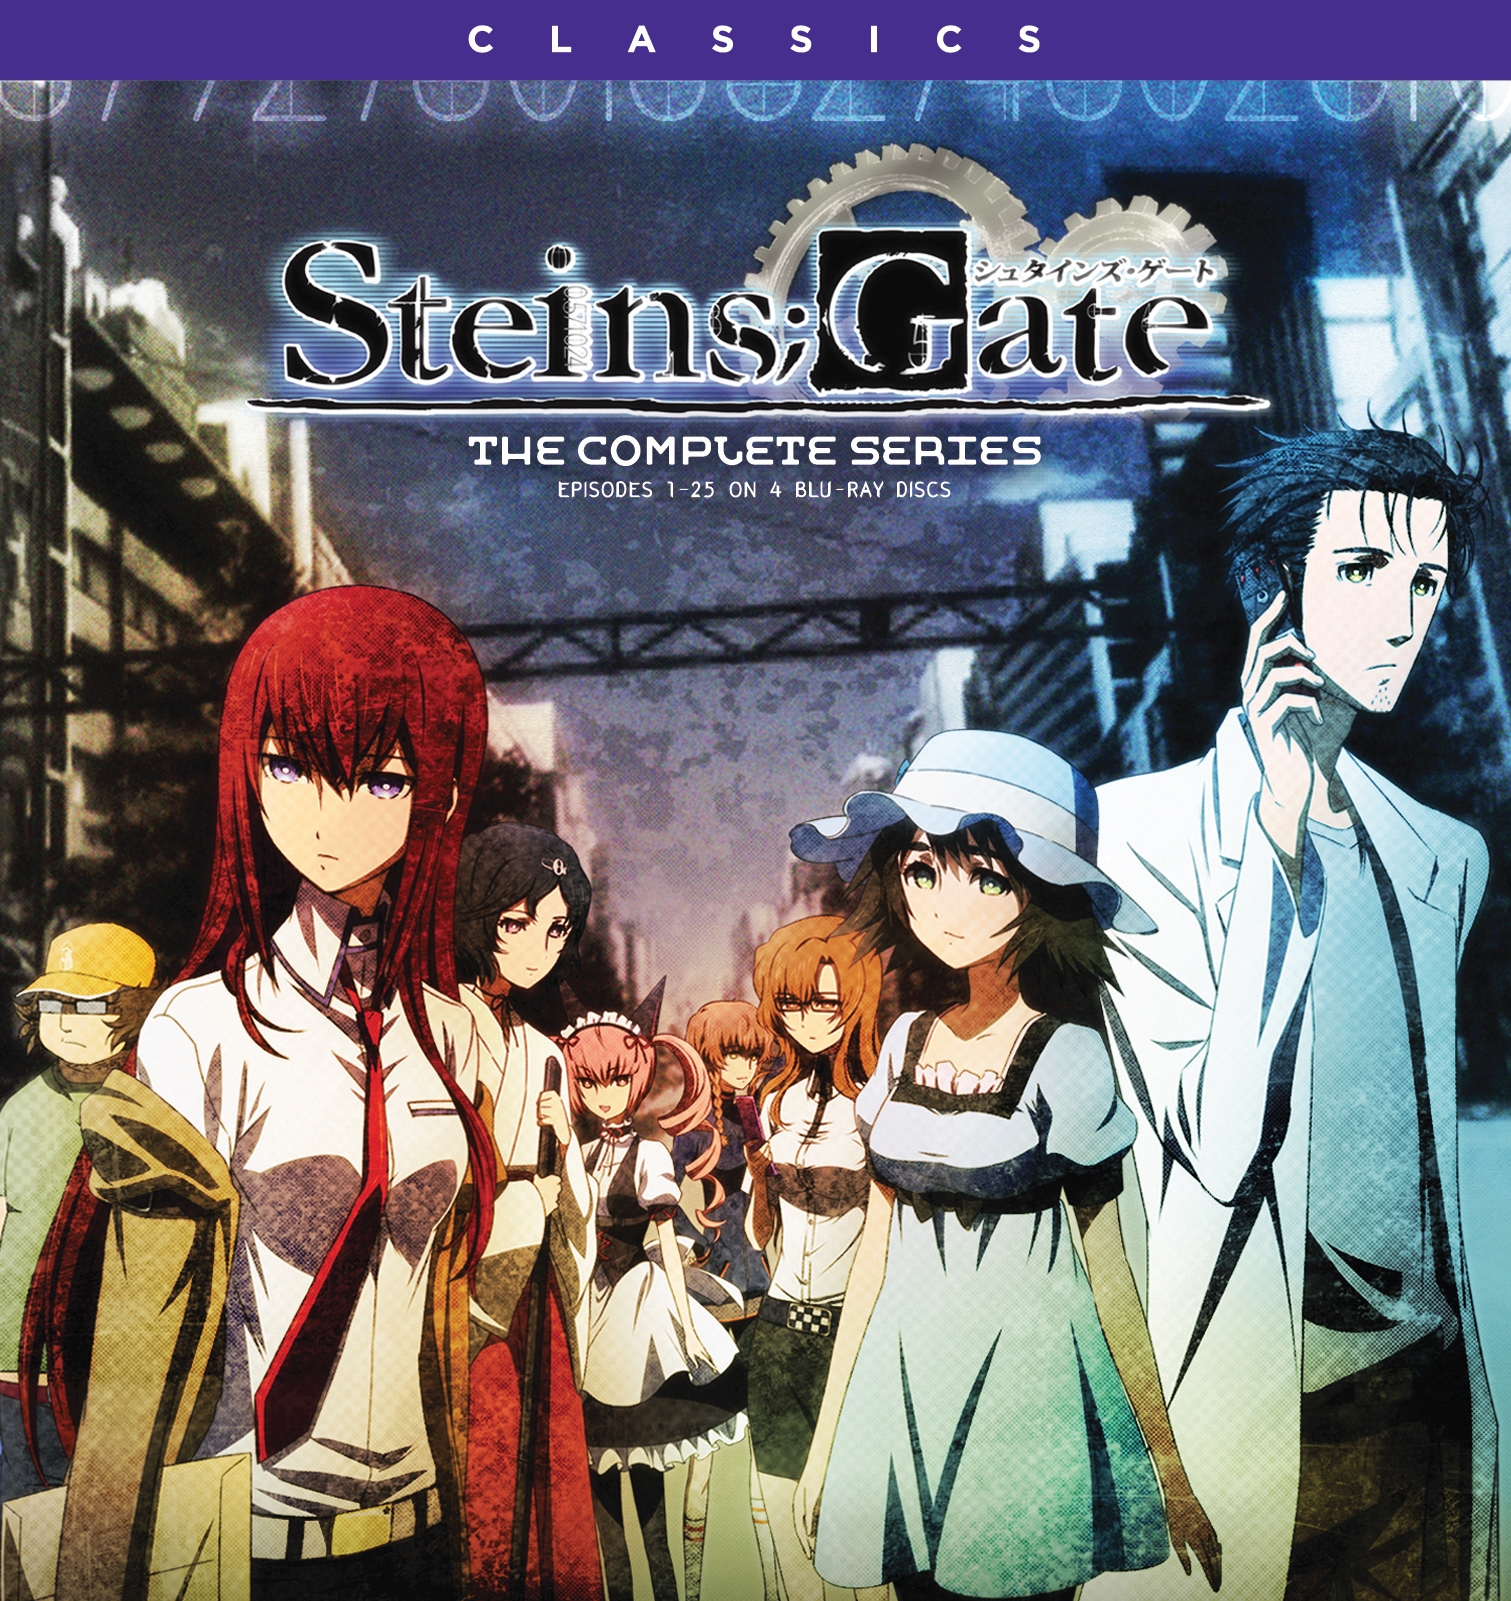 Gate - Episode 1 review